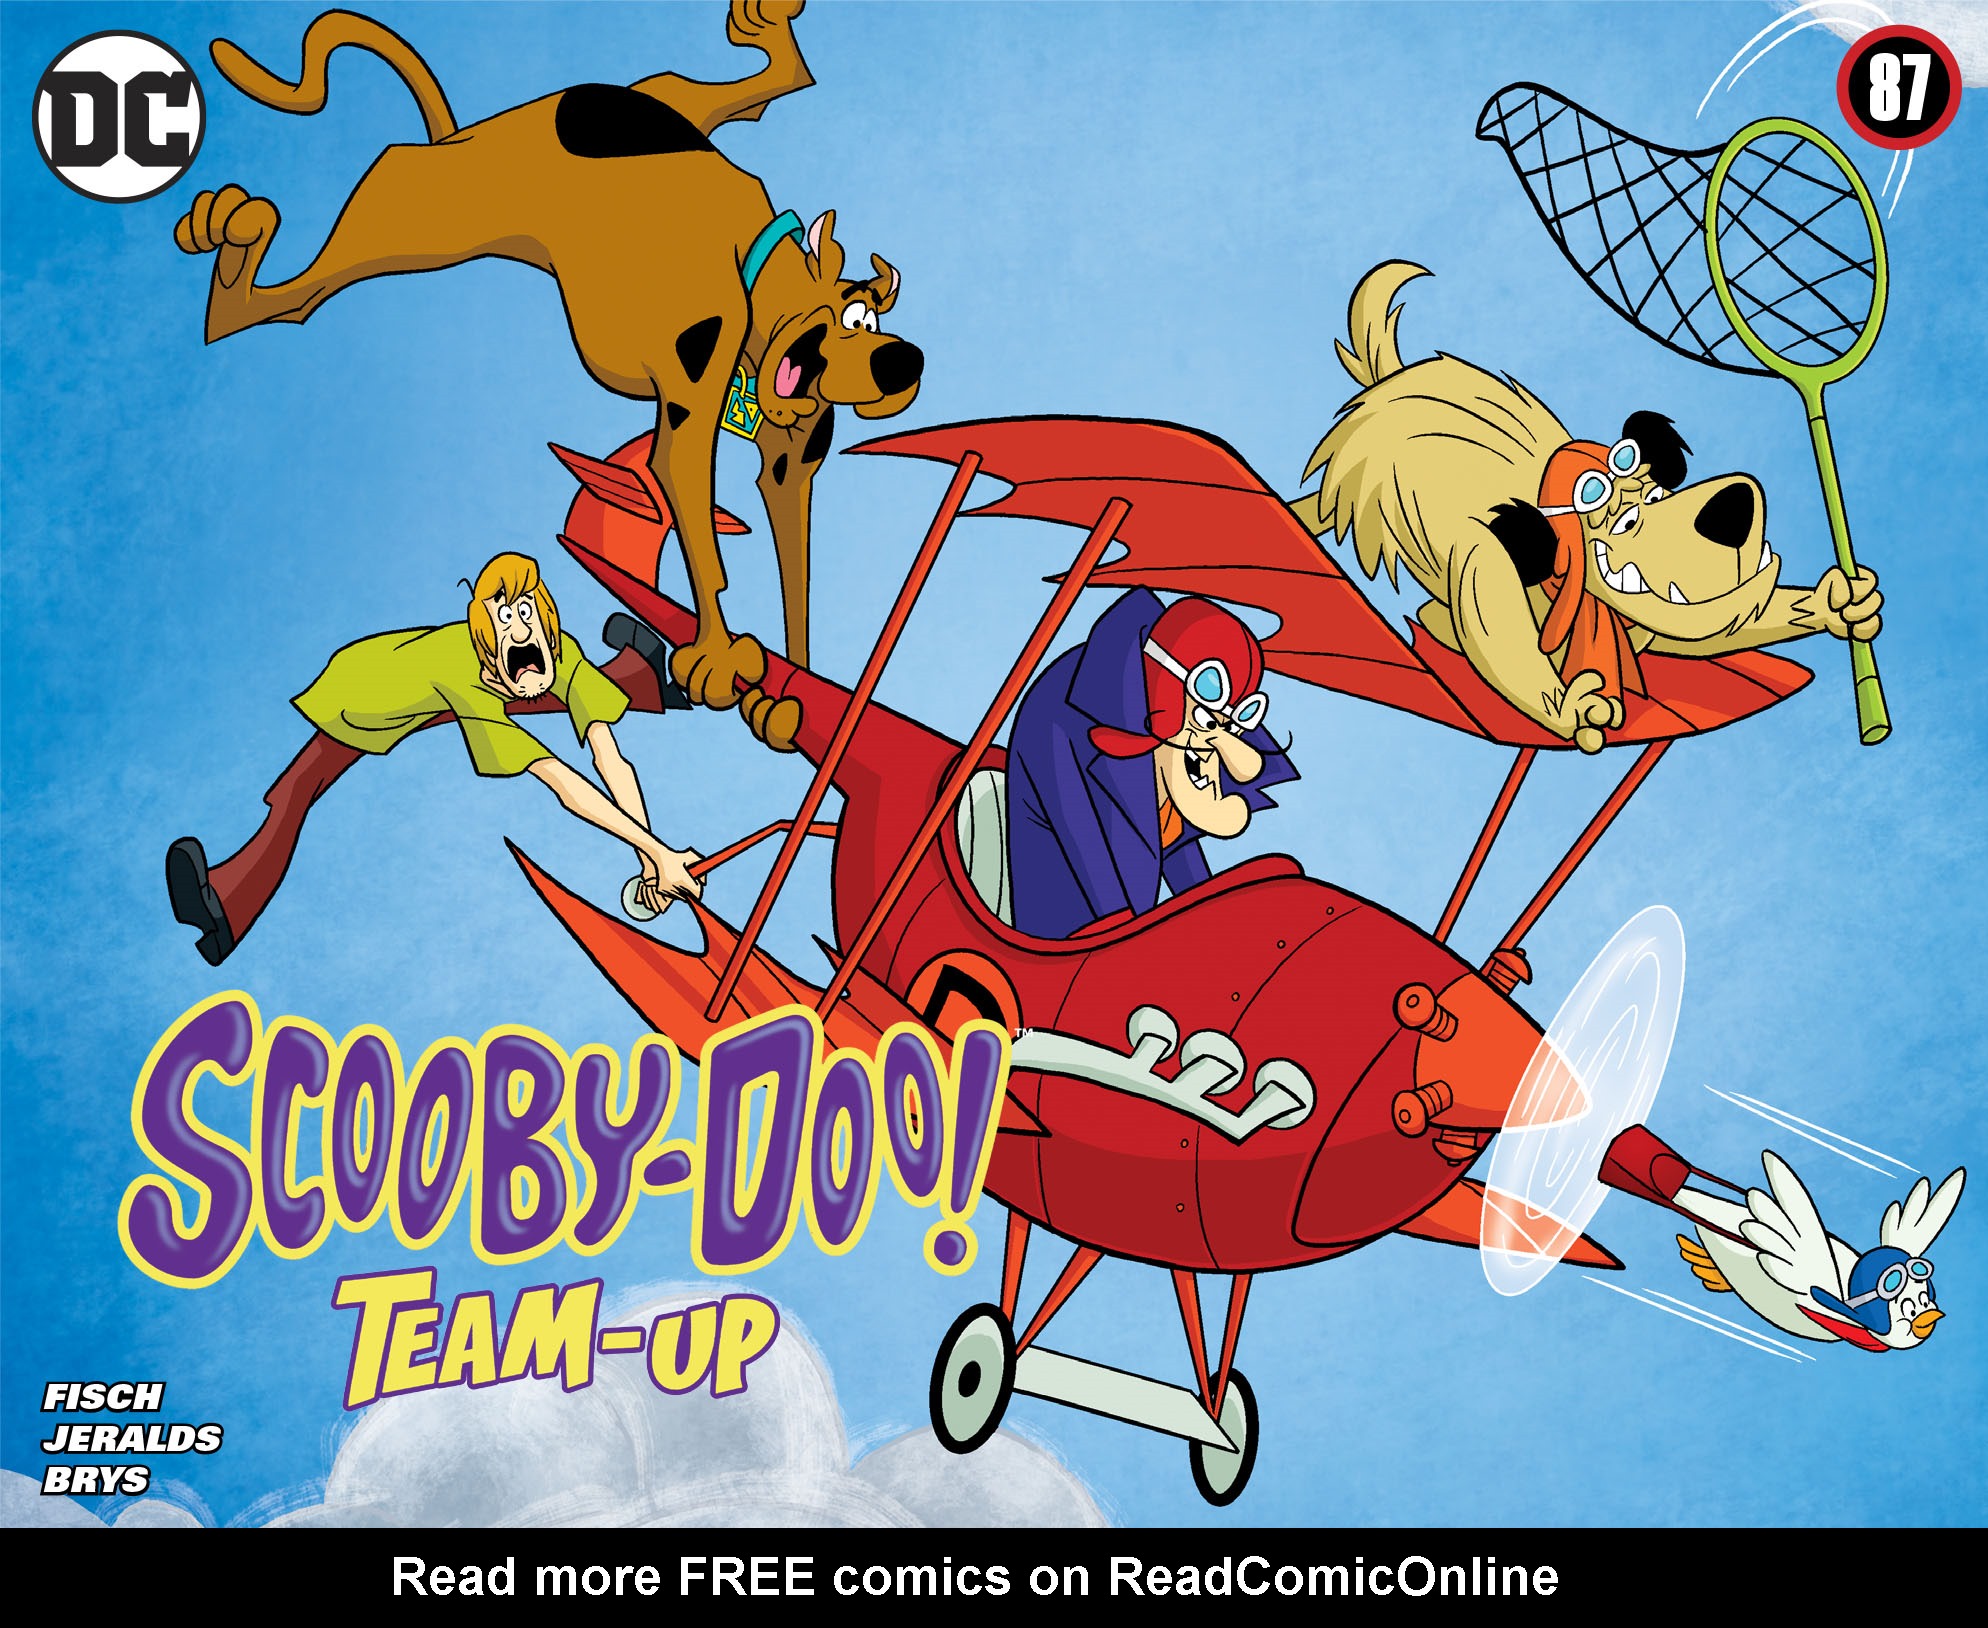 Read online Scooby-Doo! Team-Up comic -  Issue #87 - 1